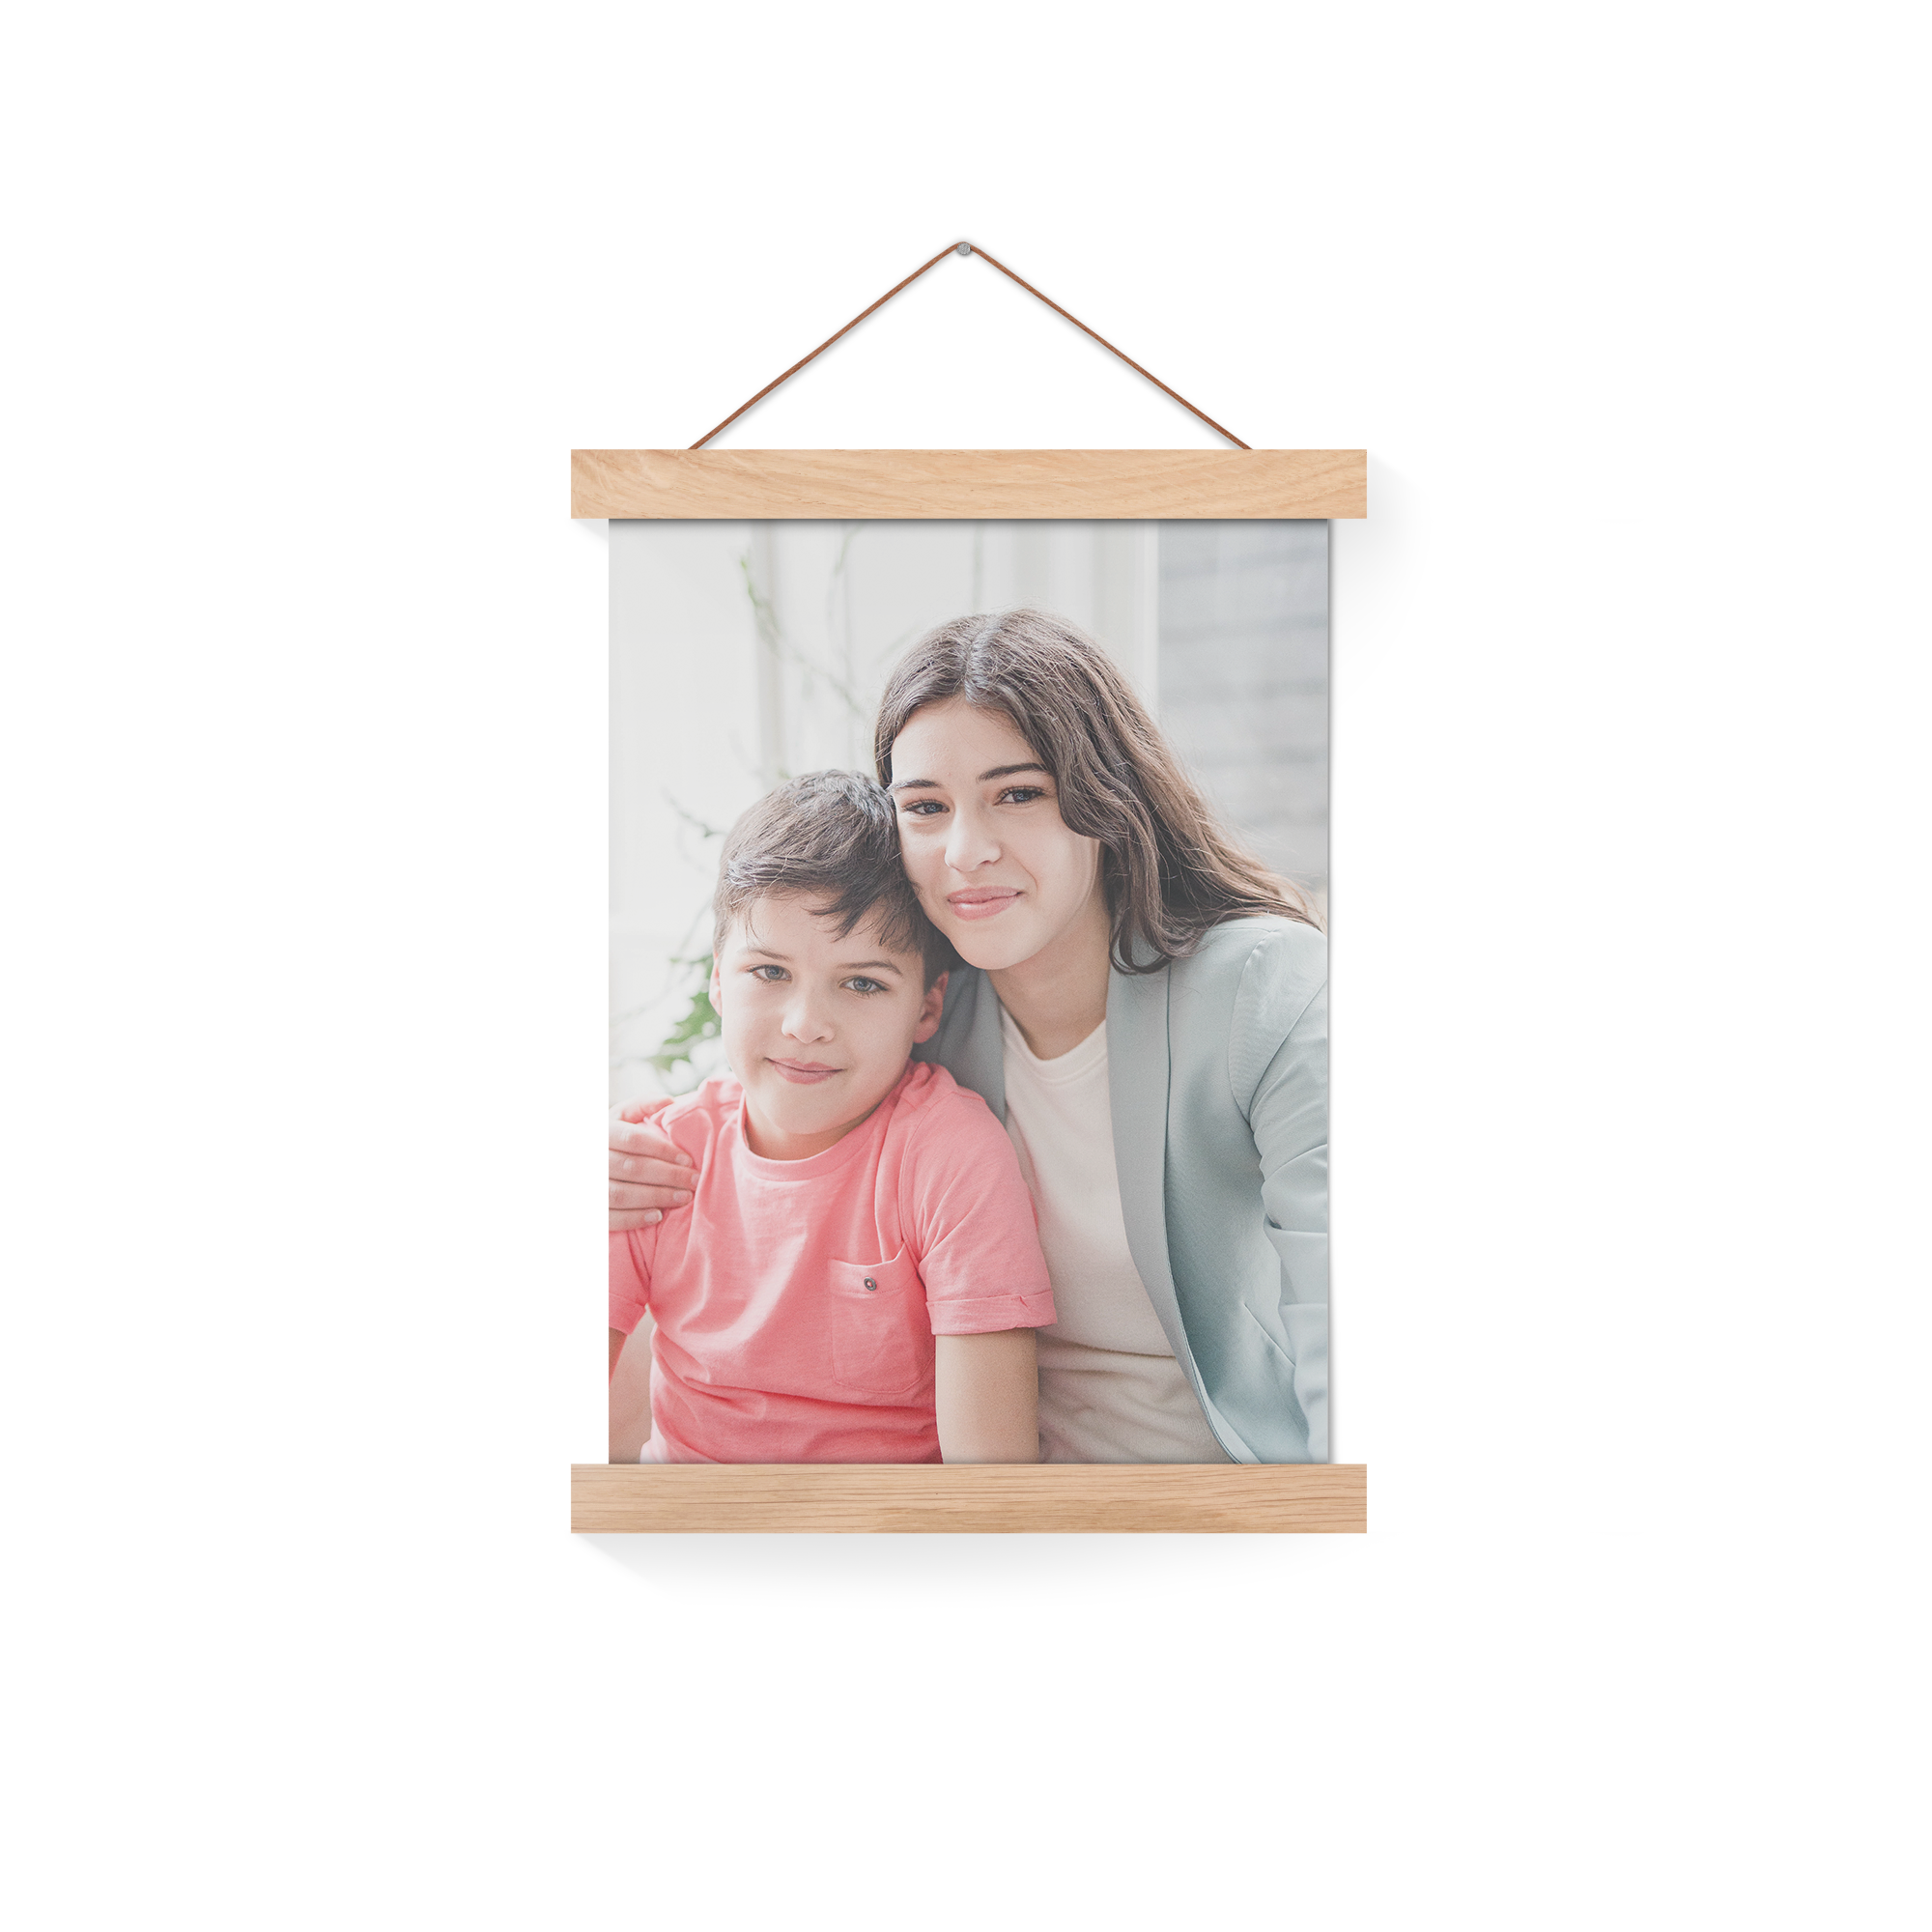 Personalised poster with wooden hanger - 20x30 